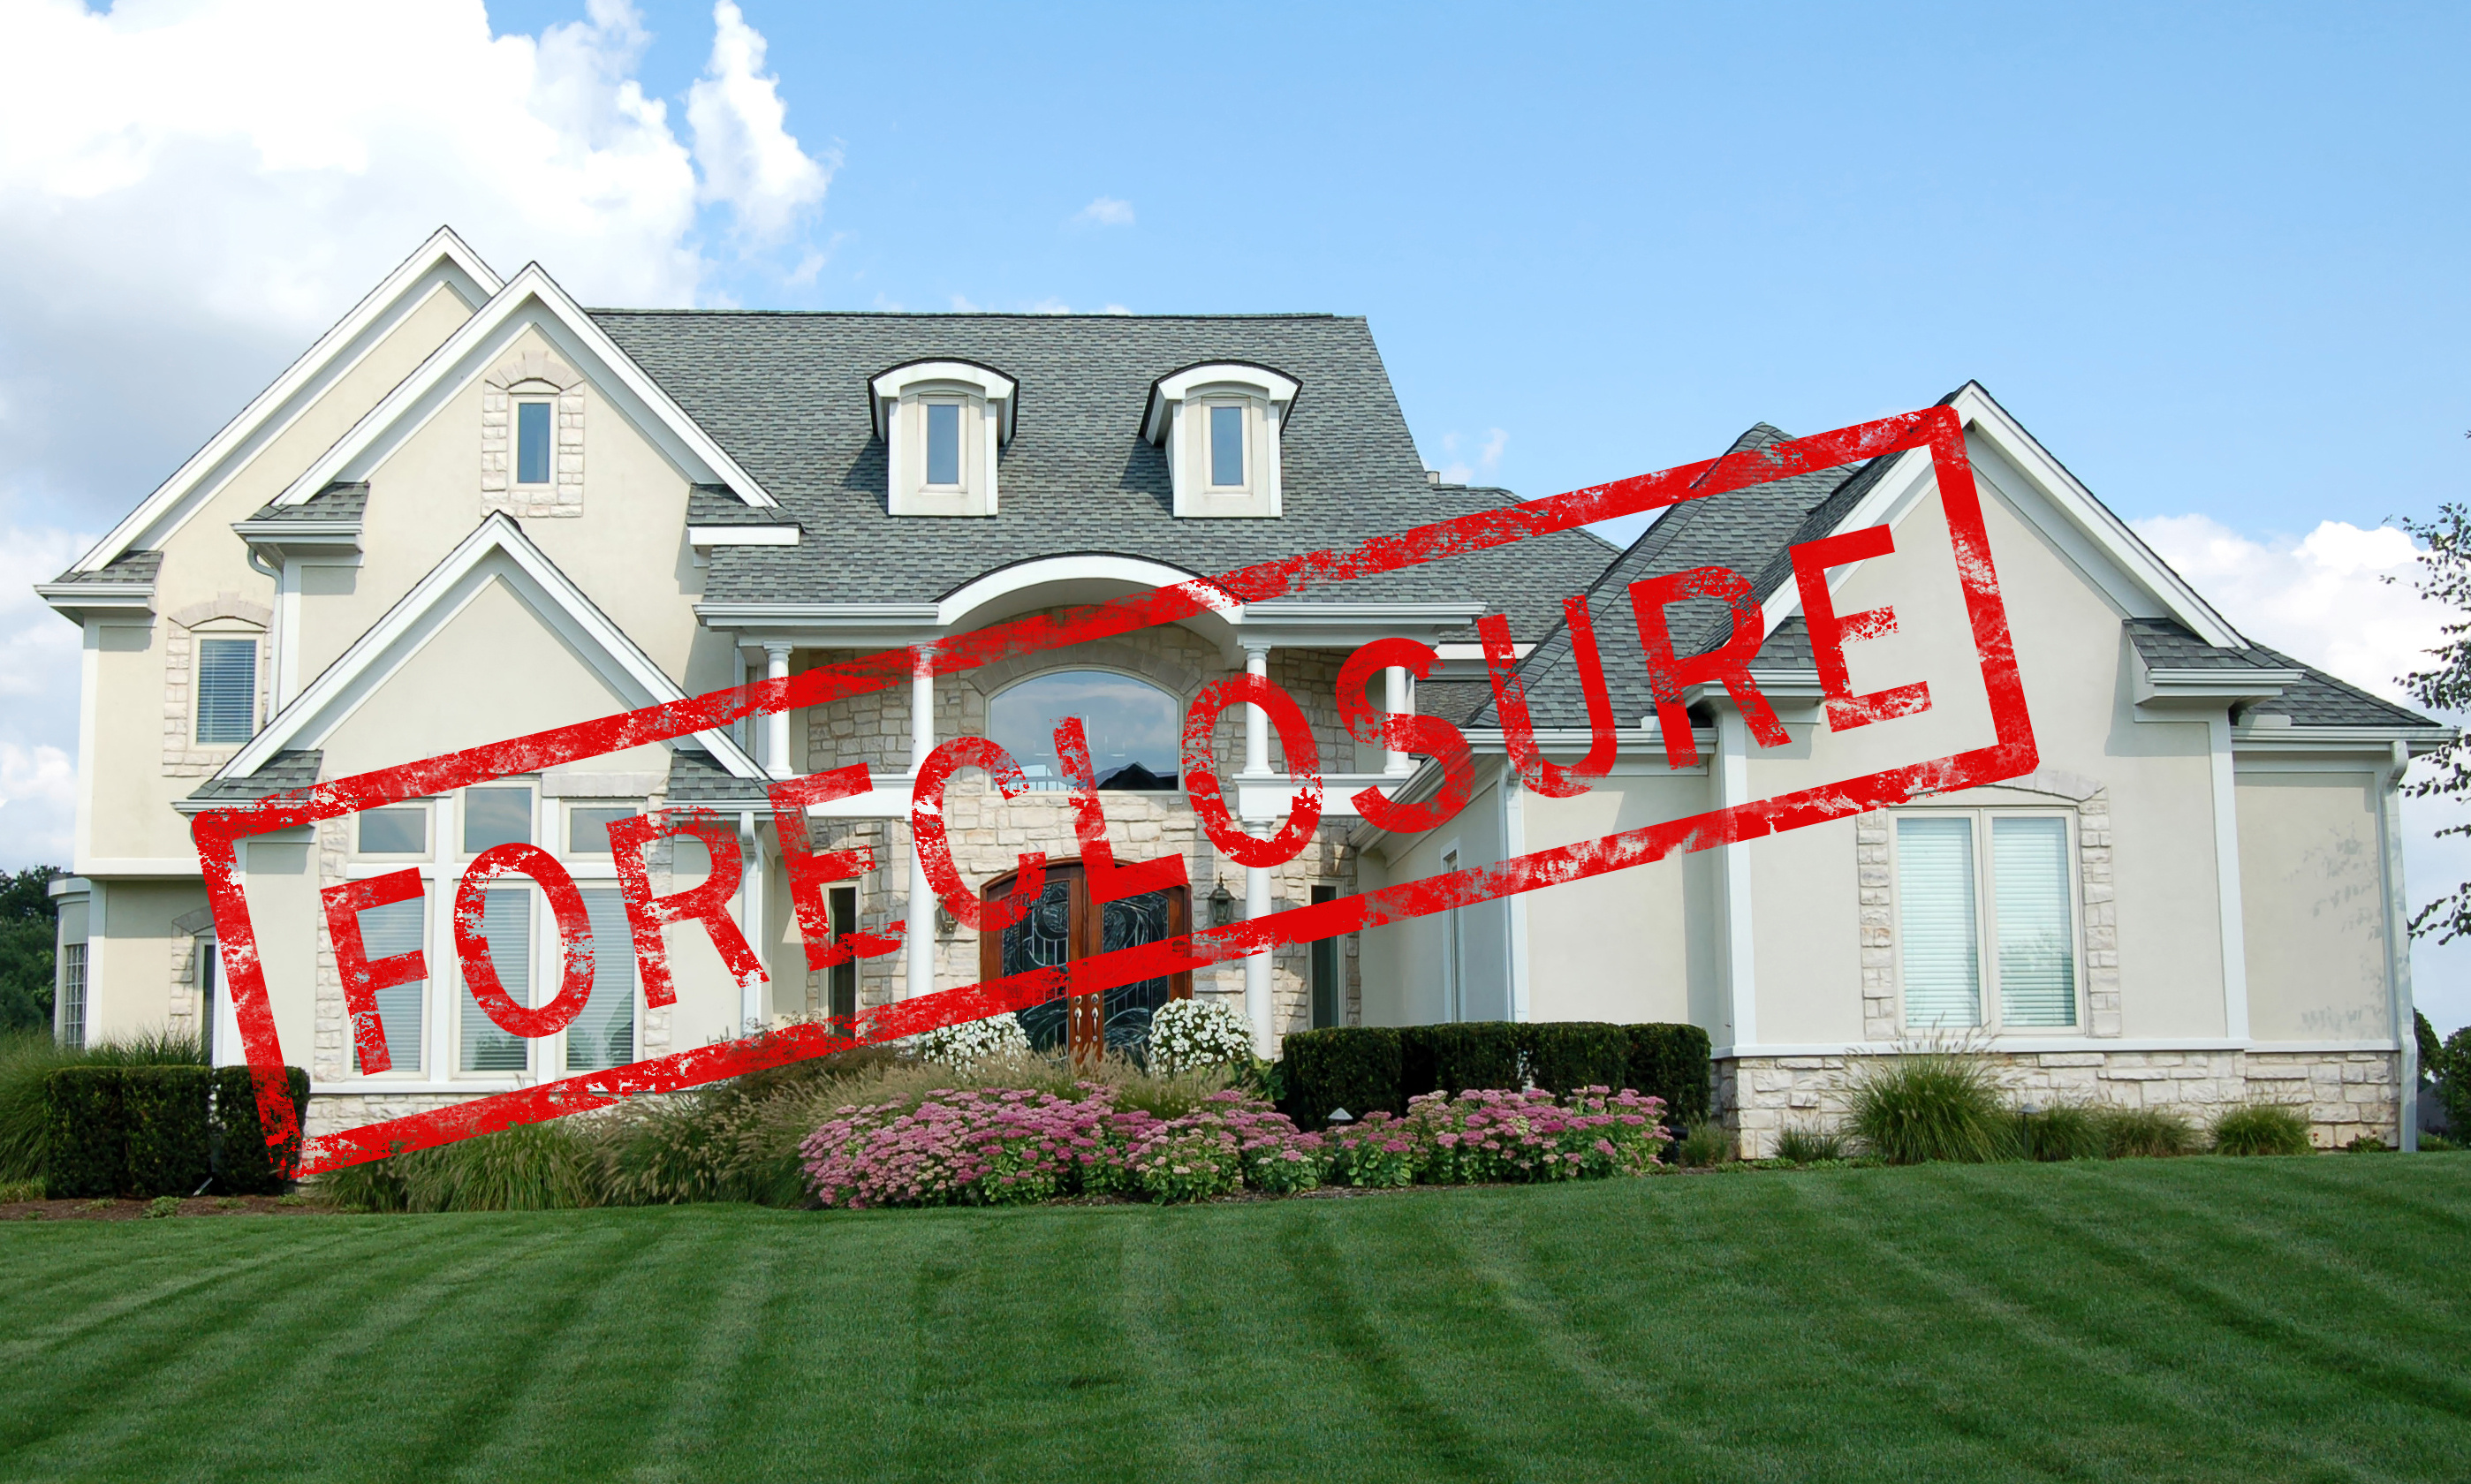 Call Appraisals by Kana when you need valuations on Lafayette foreclosures